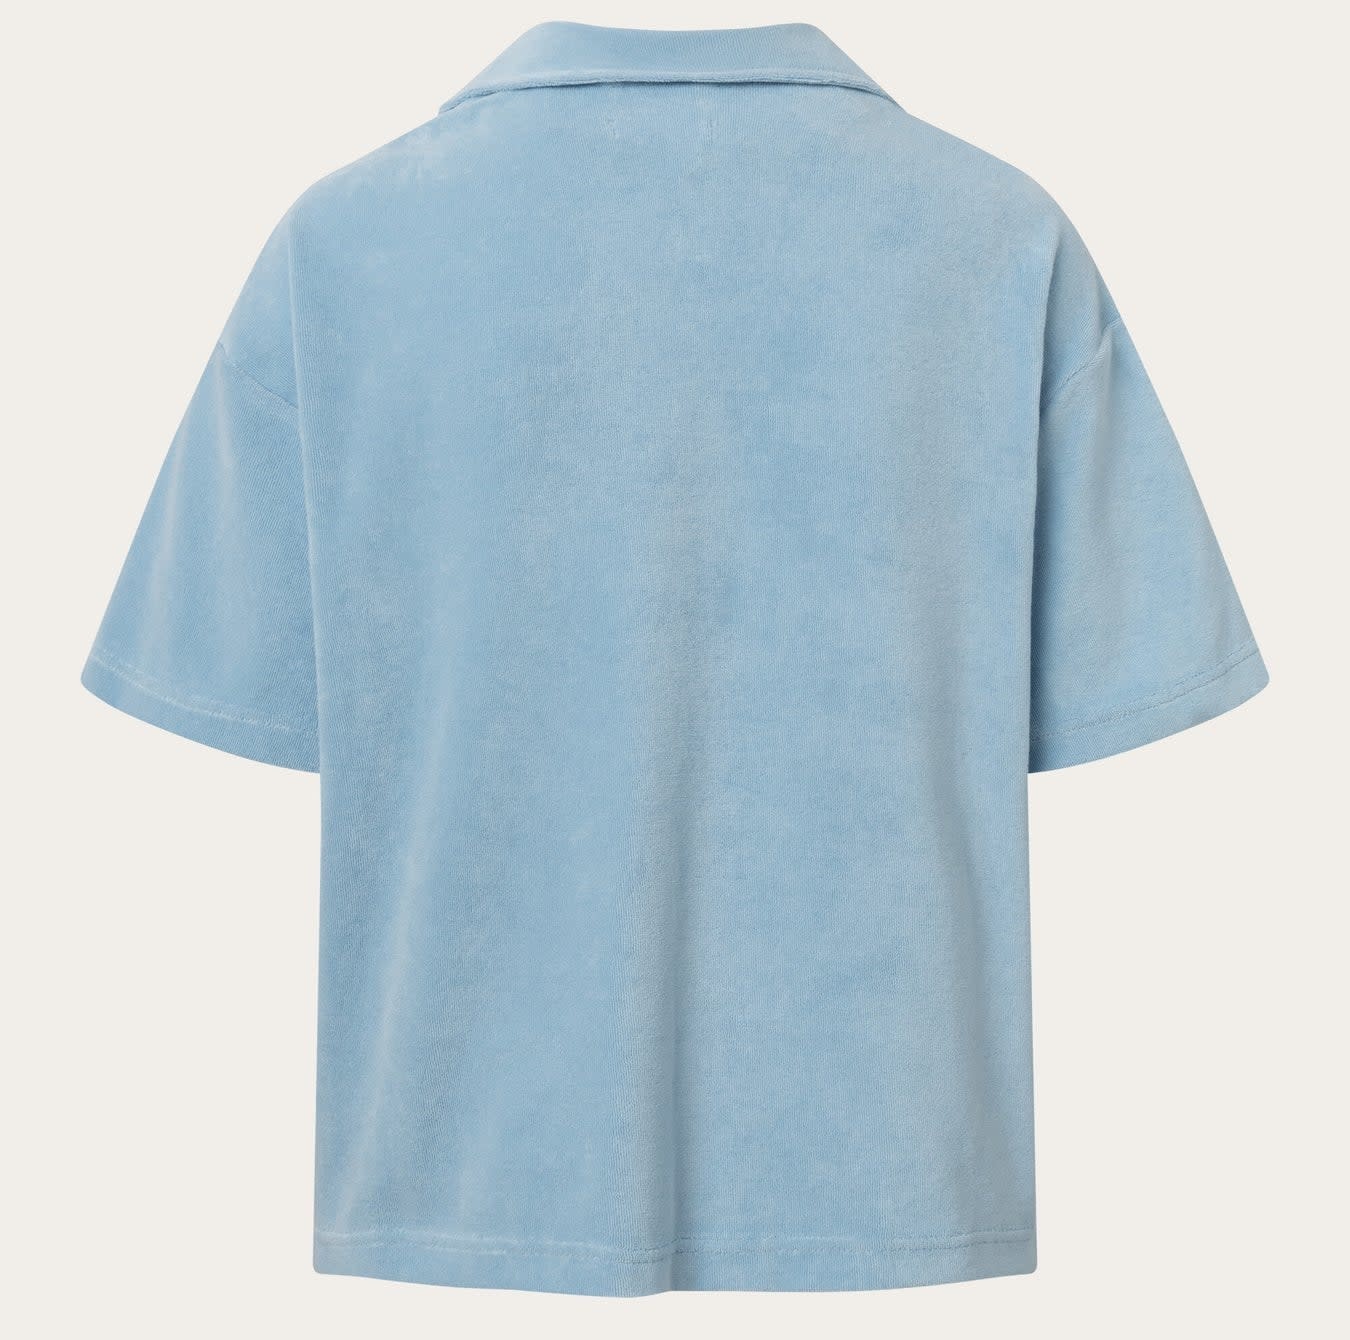 KnowledgeCotton Apparel KnowledgeCotton, Terry Shirt, airy blue, L